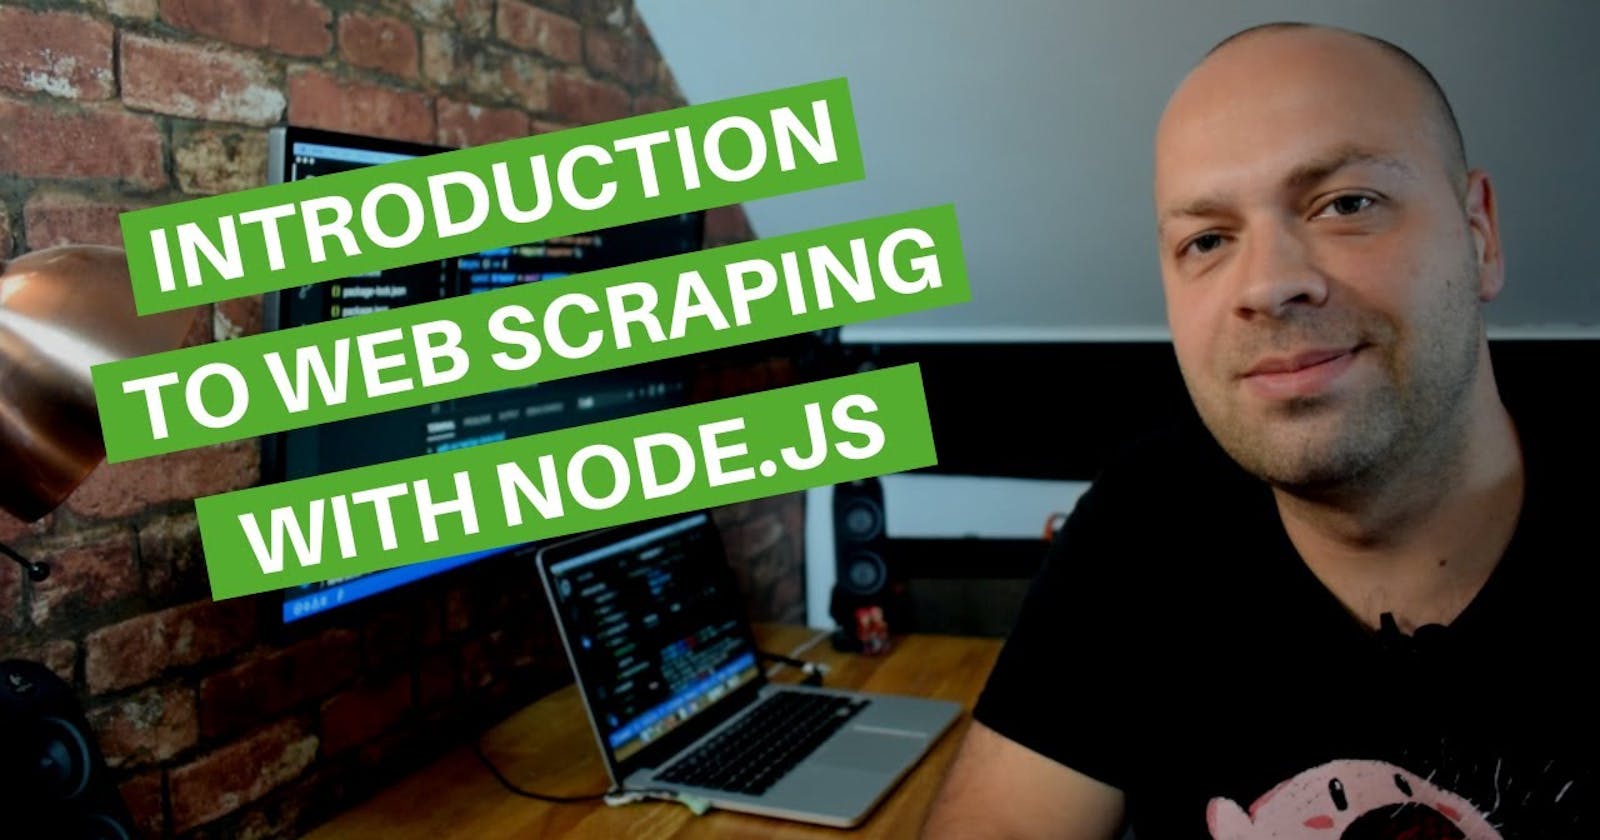 Introduction To Web Scraping With Node.js